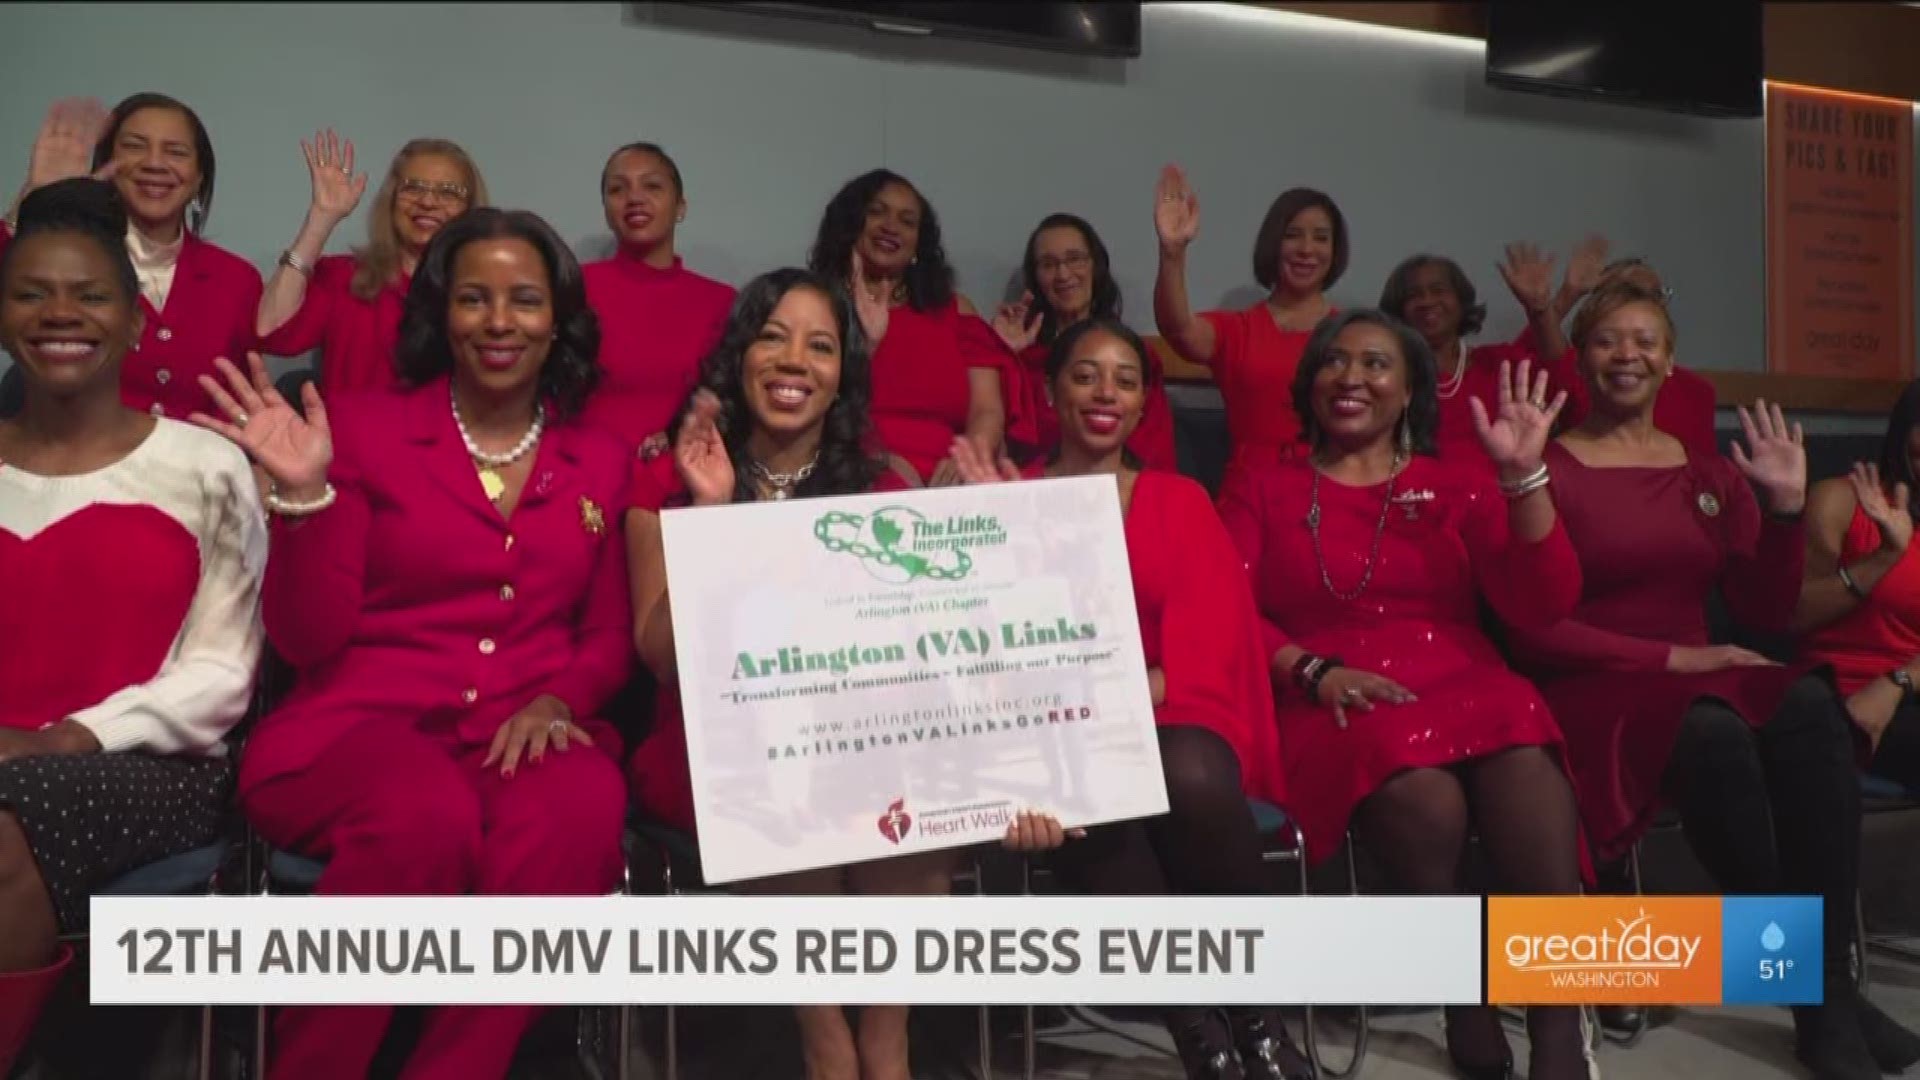 The 12th Annual DMV Links Red Dress Event is Friday February 7 from 6pm-9pm at the Hilton Alexandria Mark Center (Alexandria, VA).